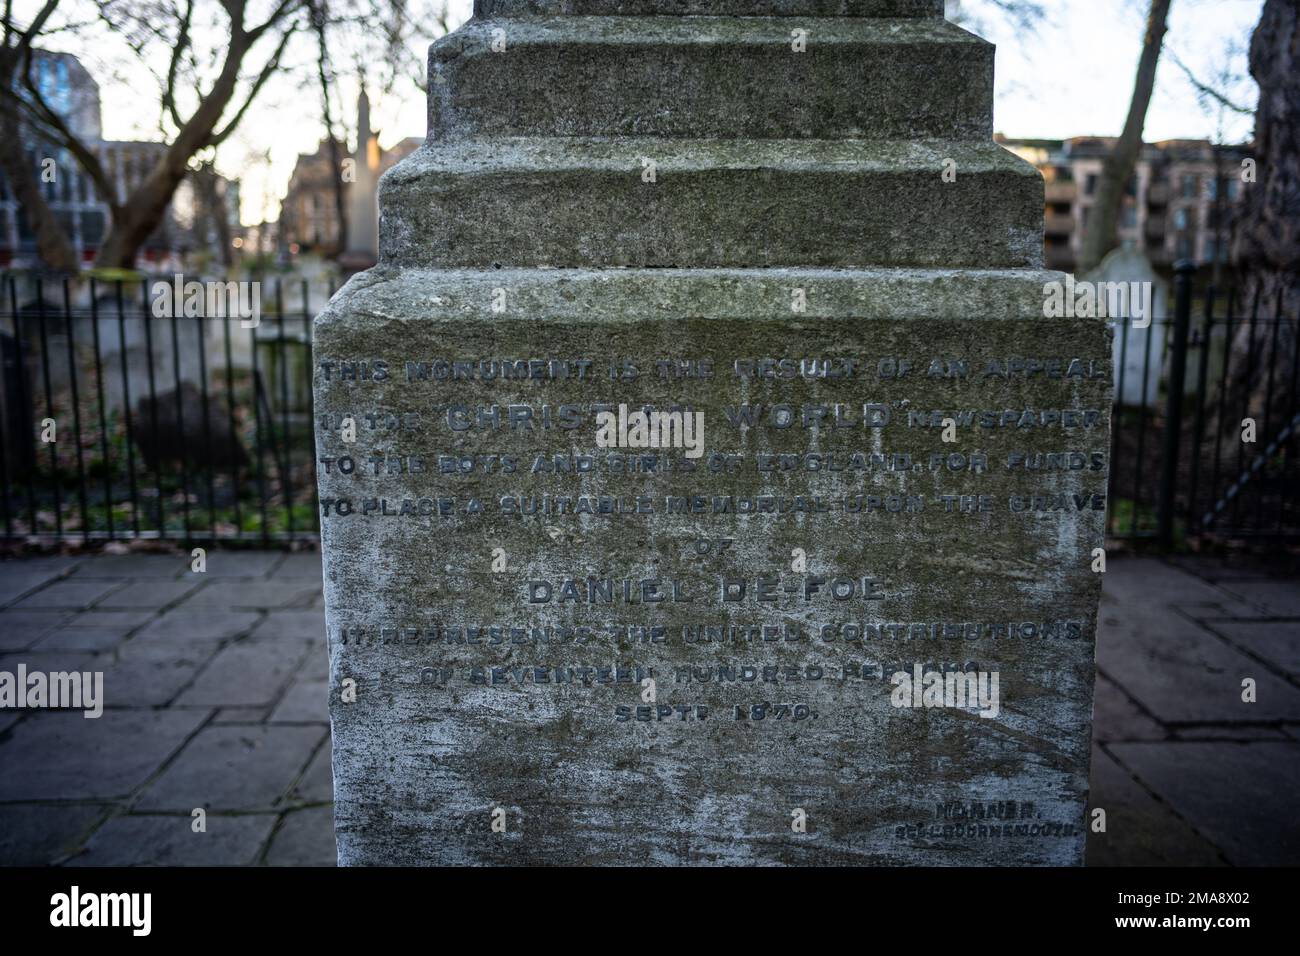 Memorial to Daniel Defoe, author of Robinson Crusoe, in Bunhill Fields, a former burial ground for nonconformists in Islington, London Stock Photo